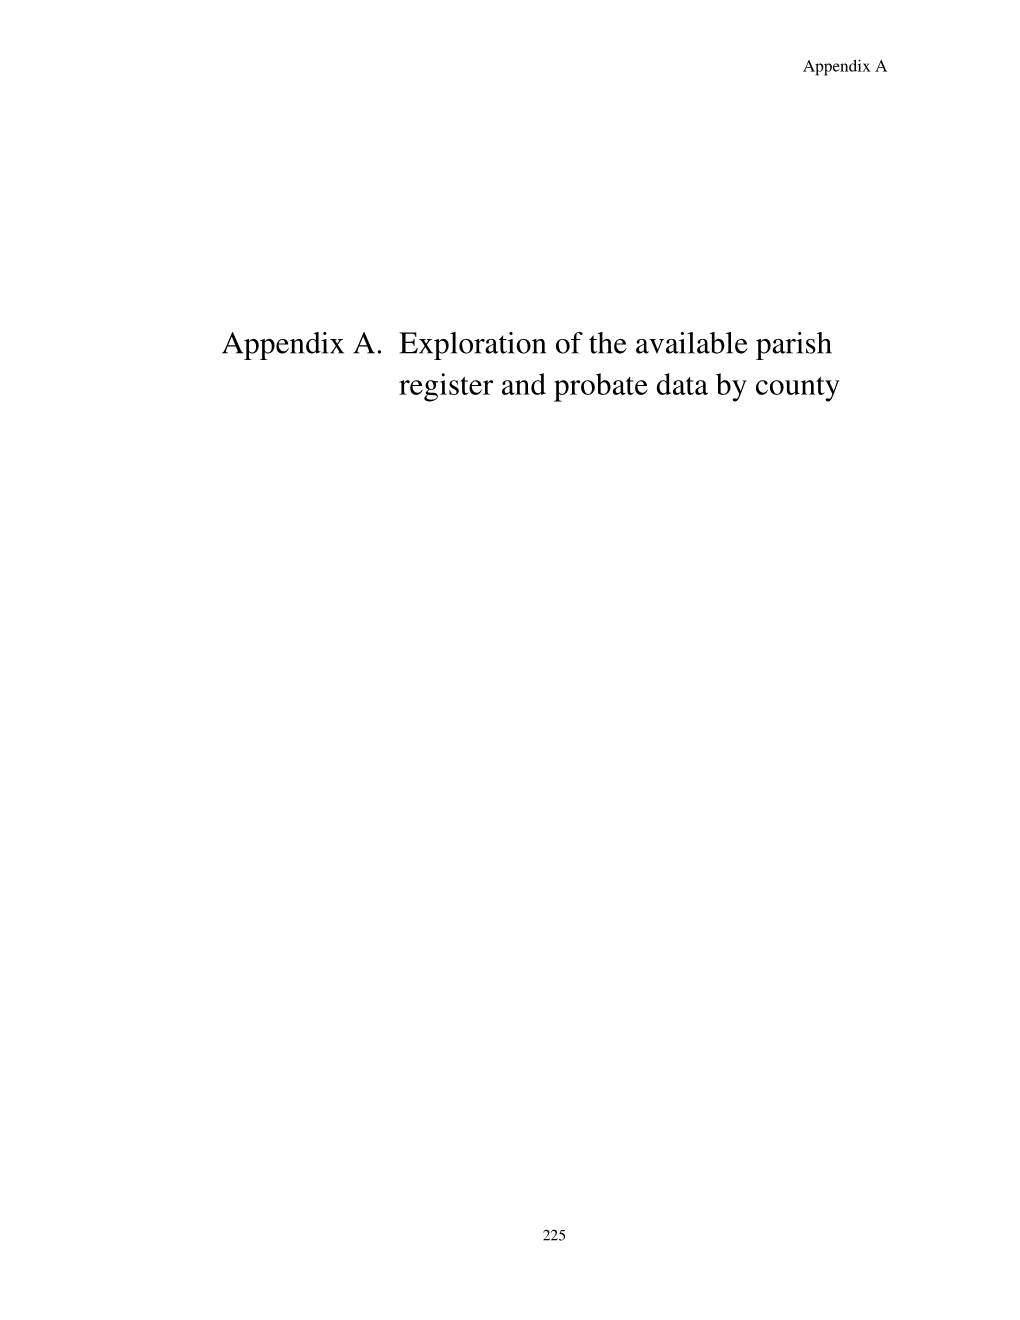 Appendix A. Exploration of the Available Parish Register and Probate Data by County